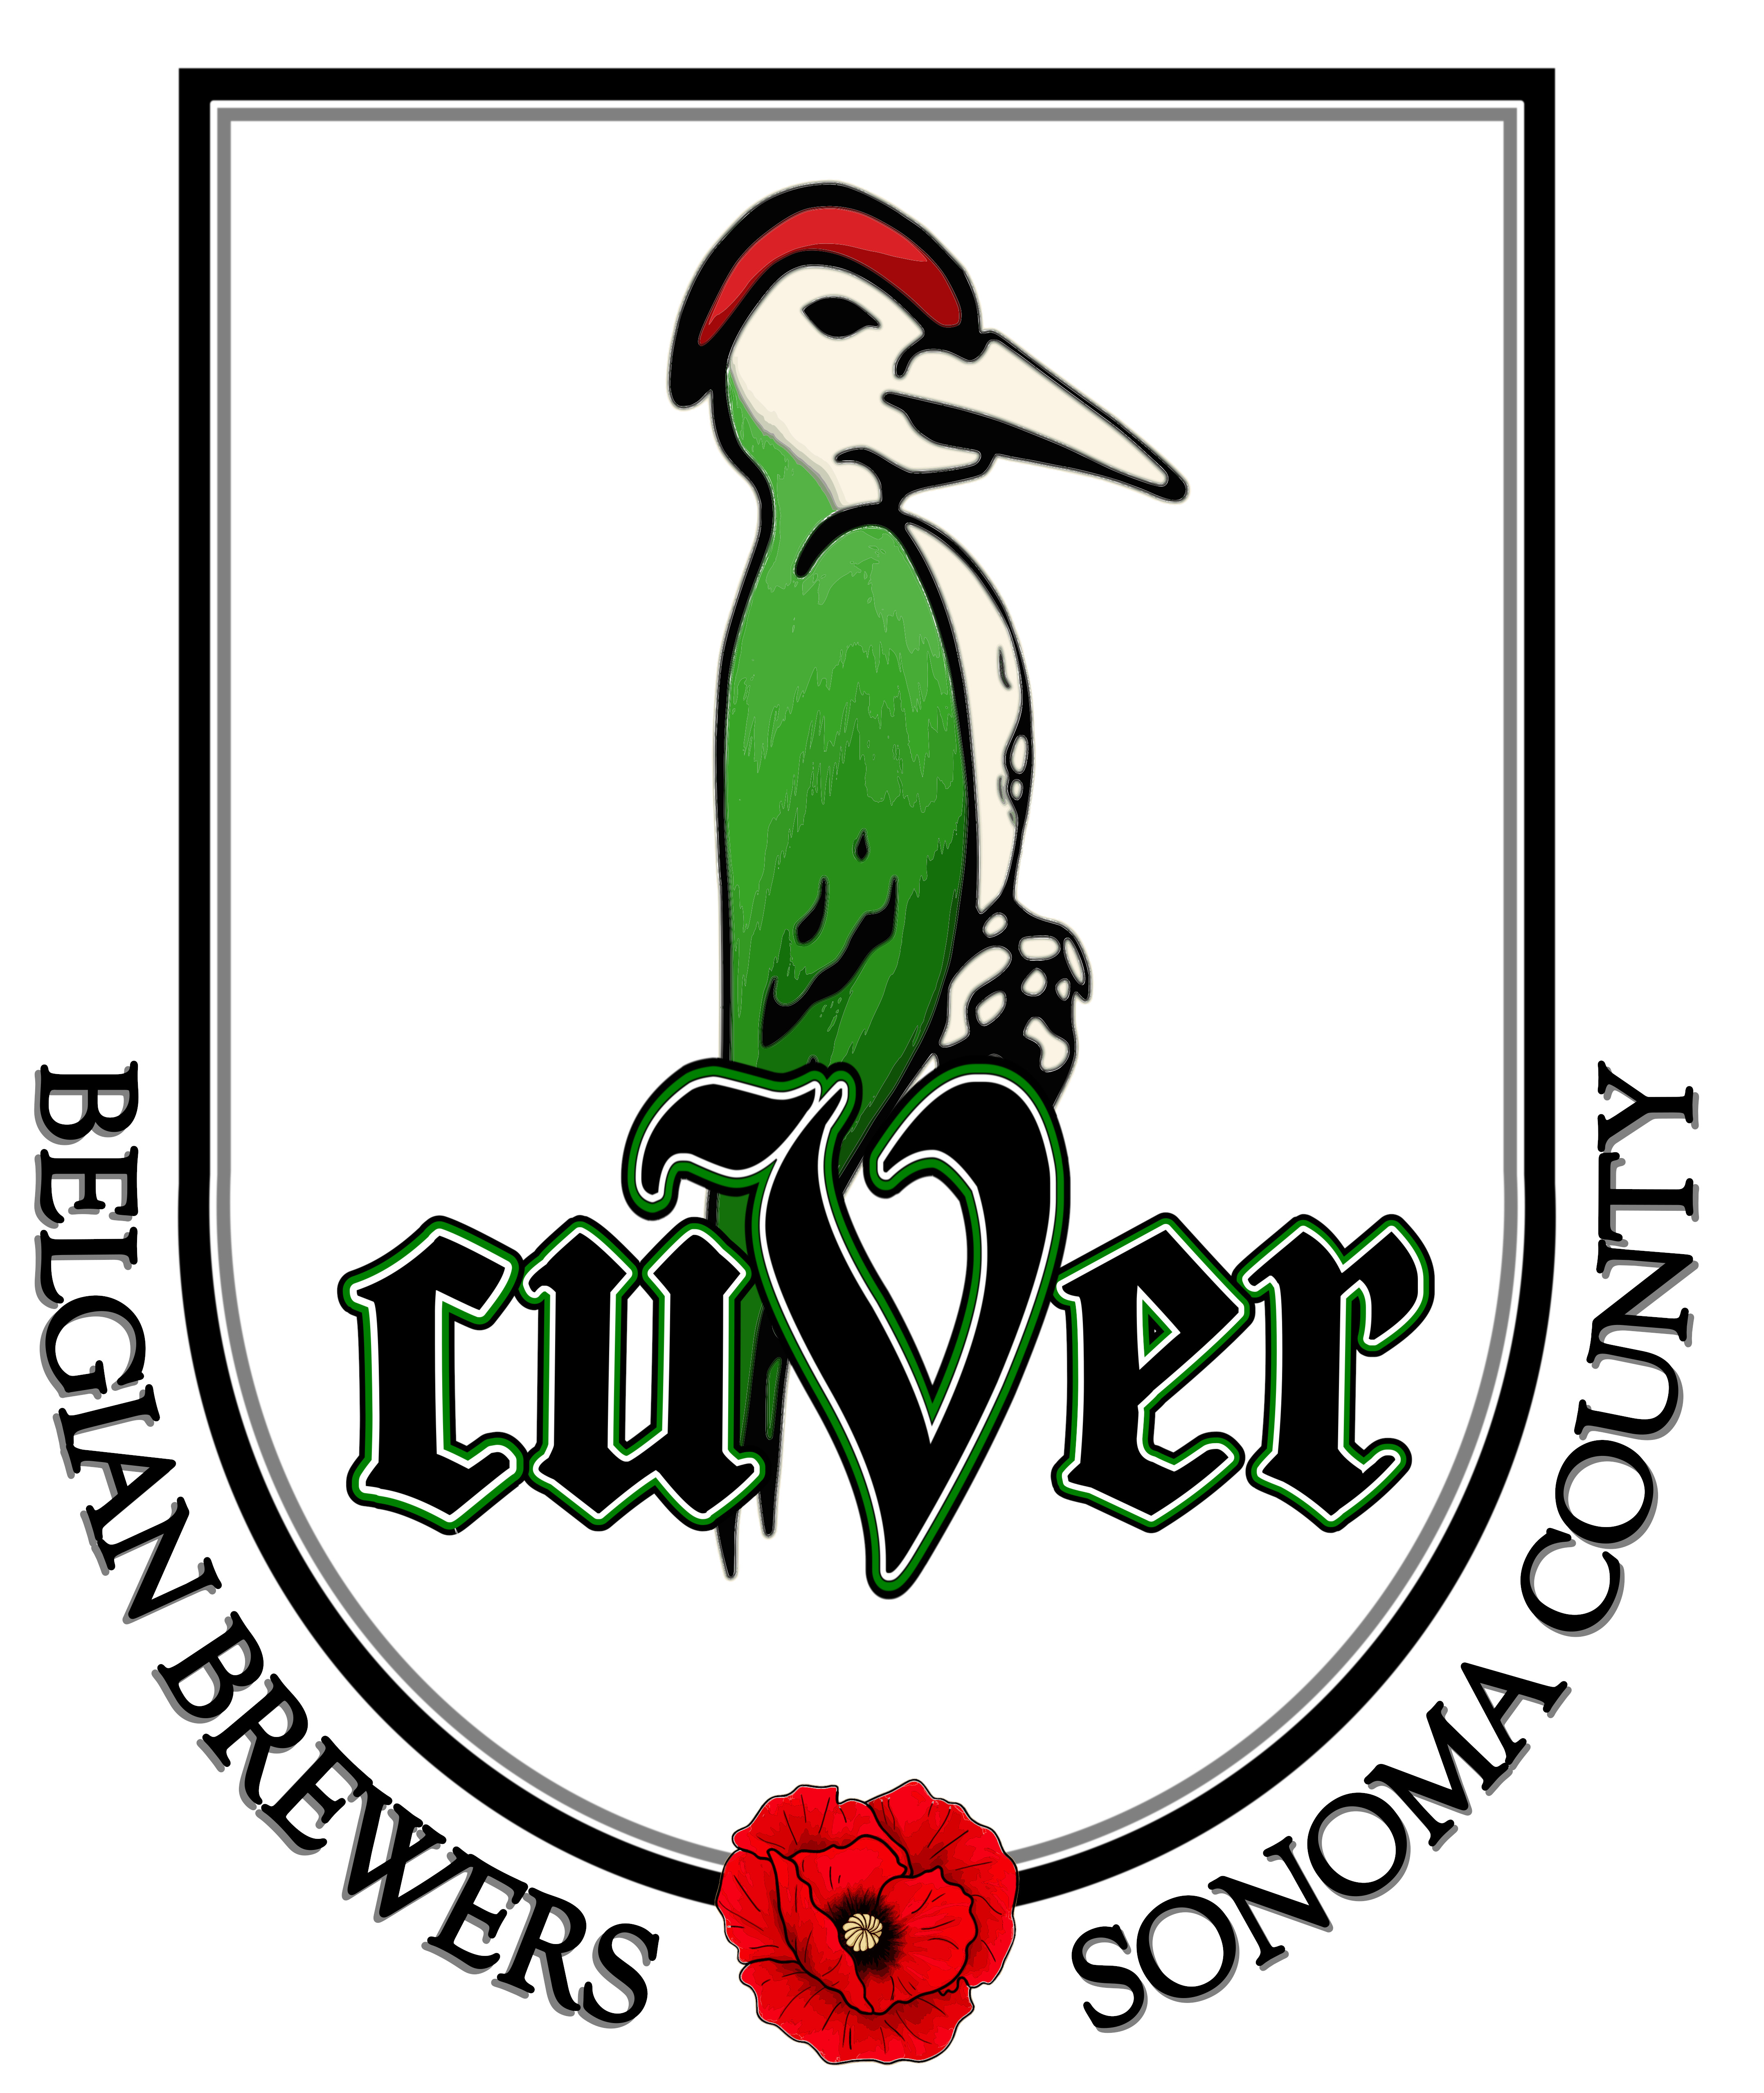 CUVER Belgian Brewers